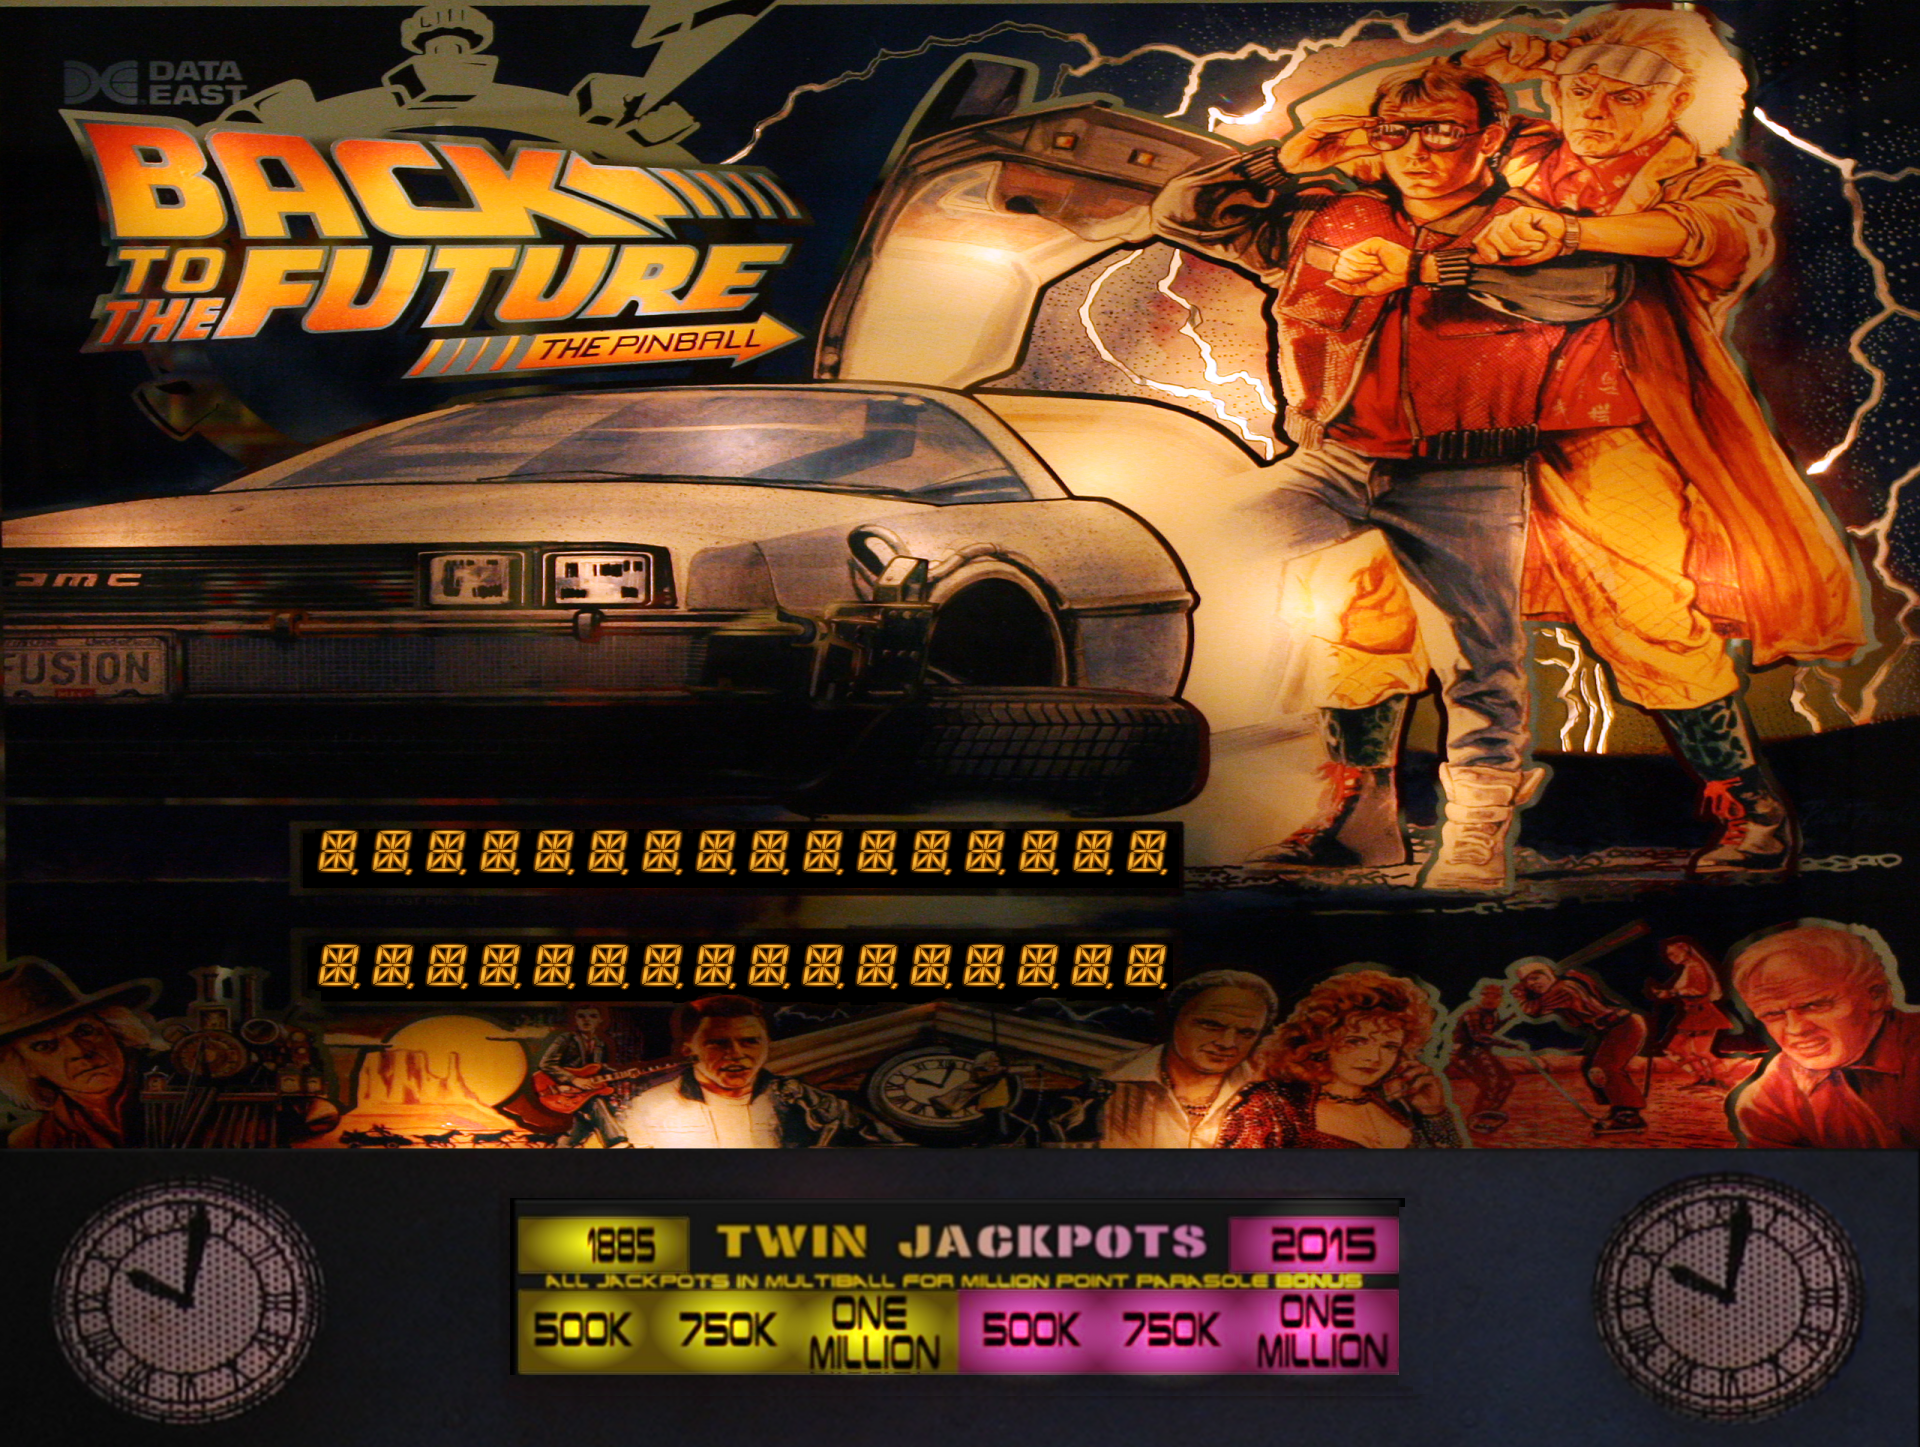 DATA EAST BACK TO THE FUTURE PINBALL 9" x 12" METAL SIGN 